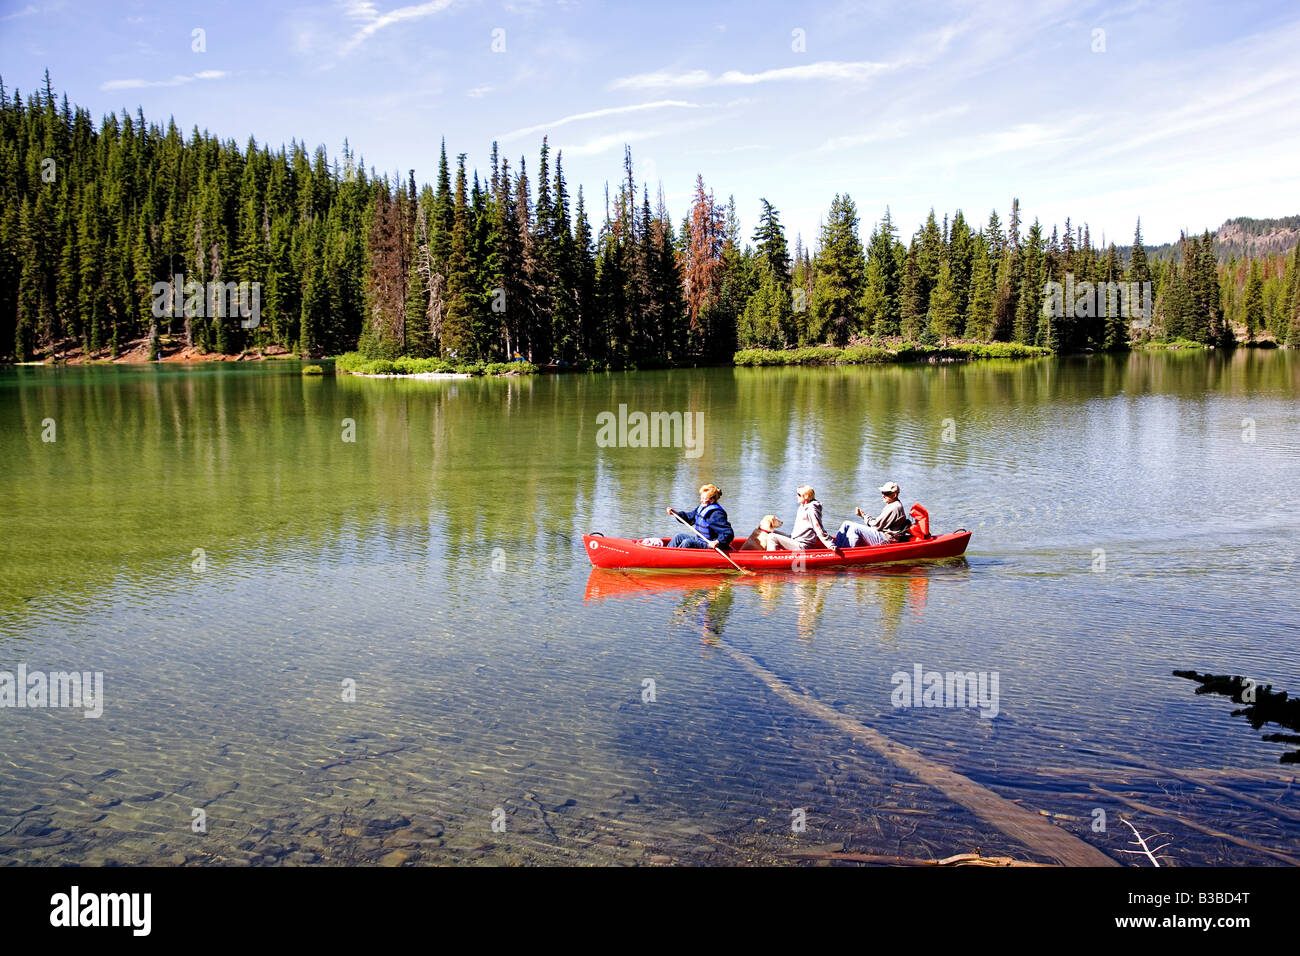 A canoe filled with visitors tours Devils Lake in the central oregon Cascades near Mount Bachelor on the CAscade Lakes Highway Stock Photo